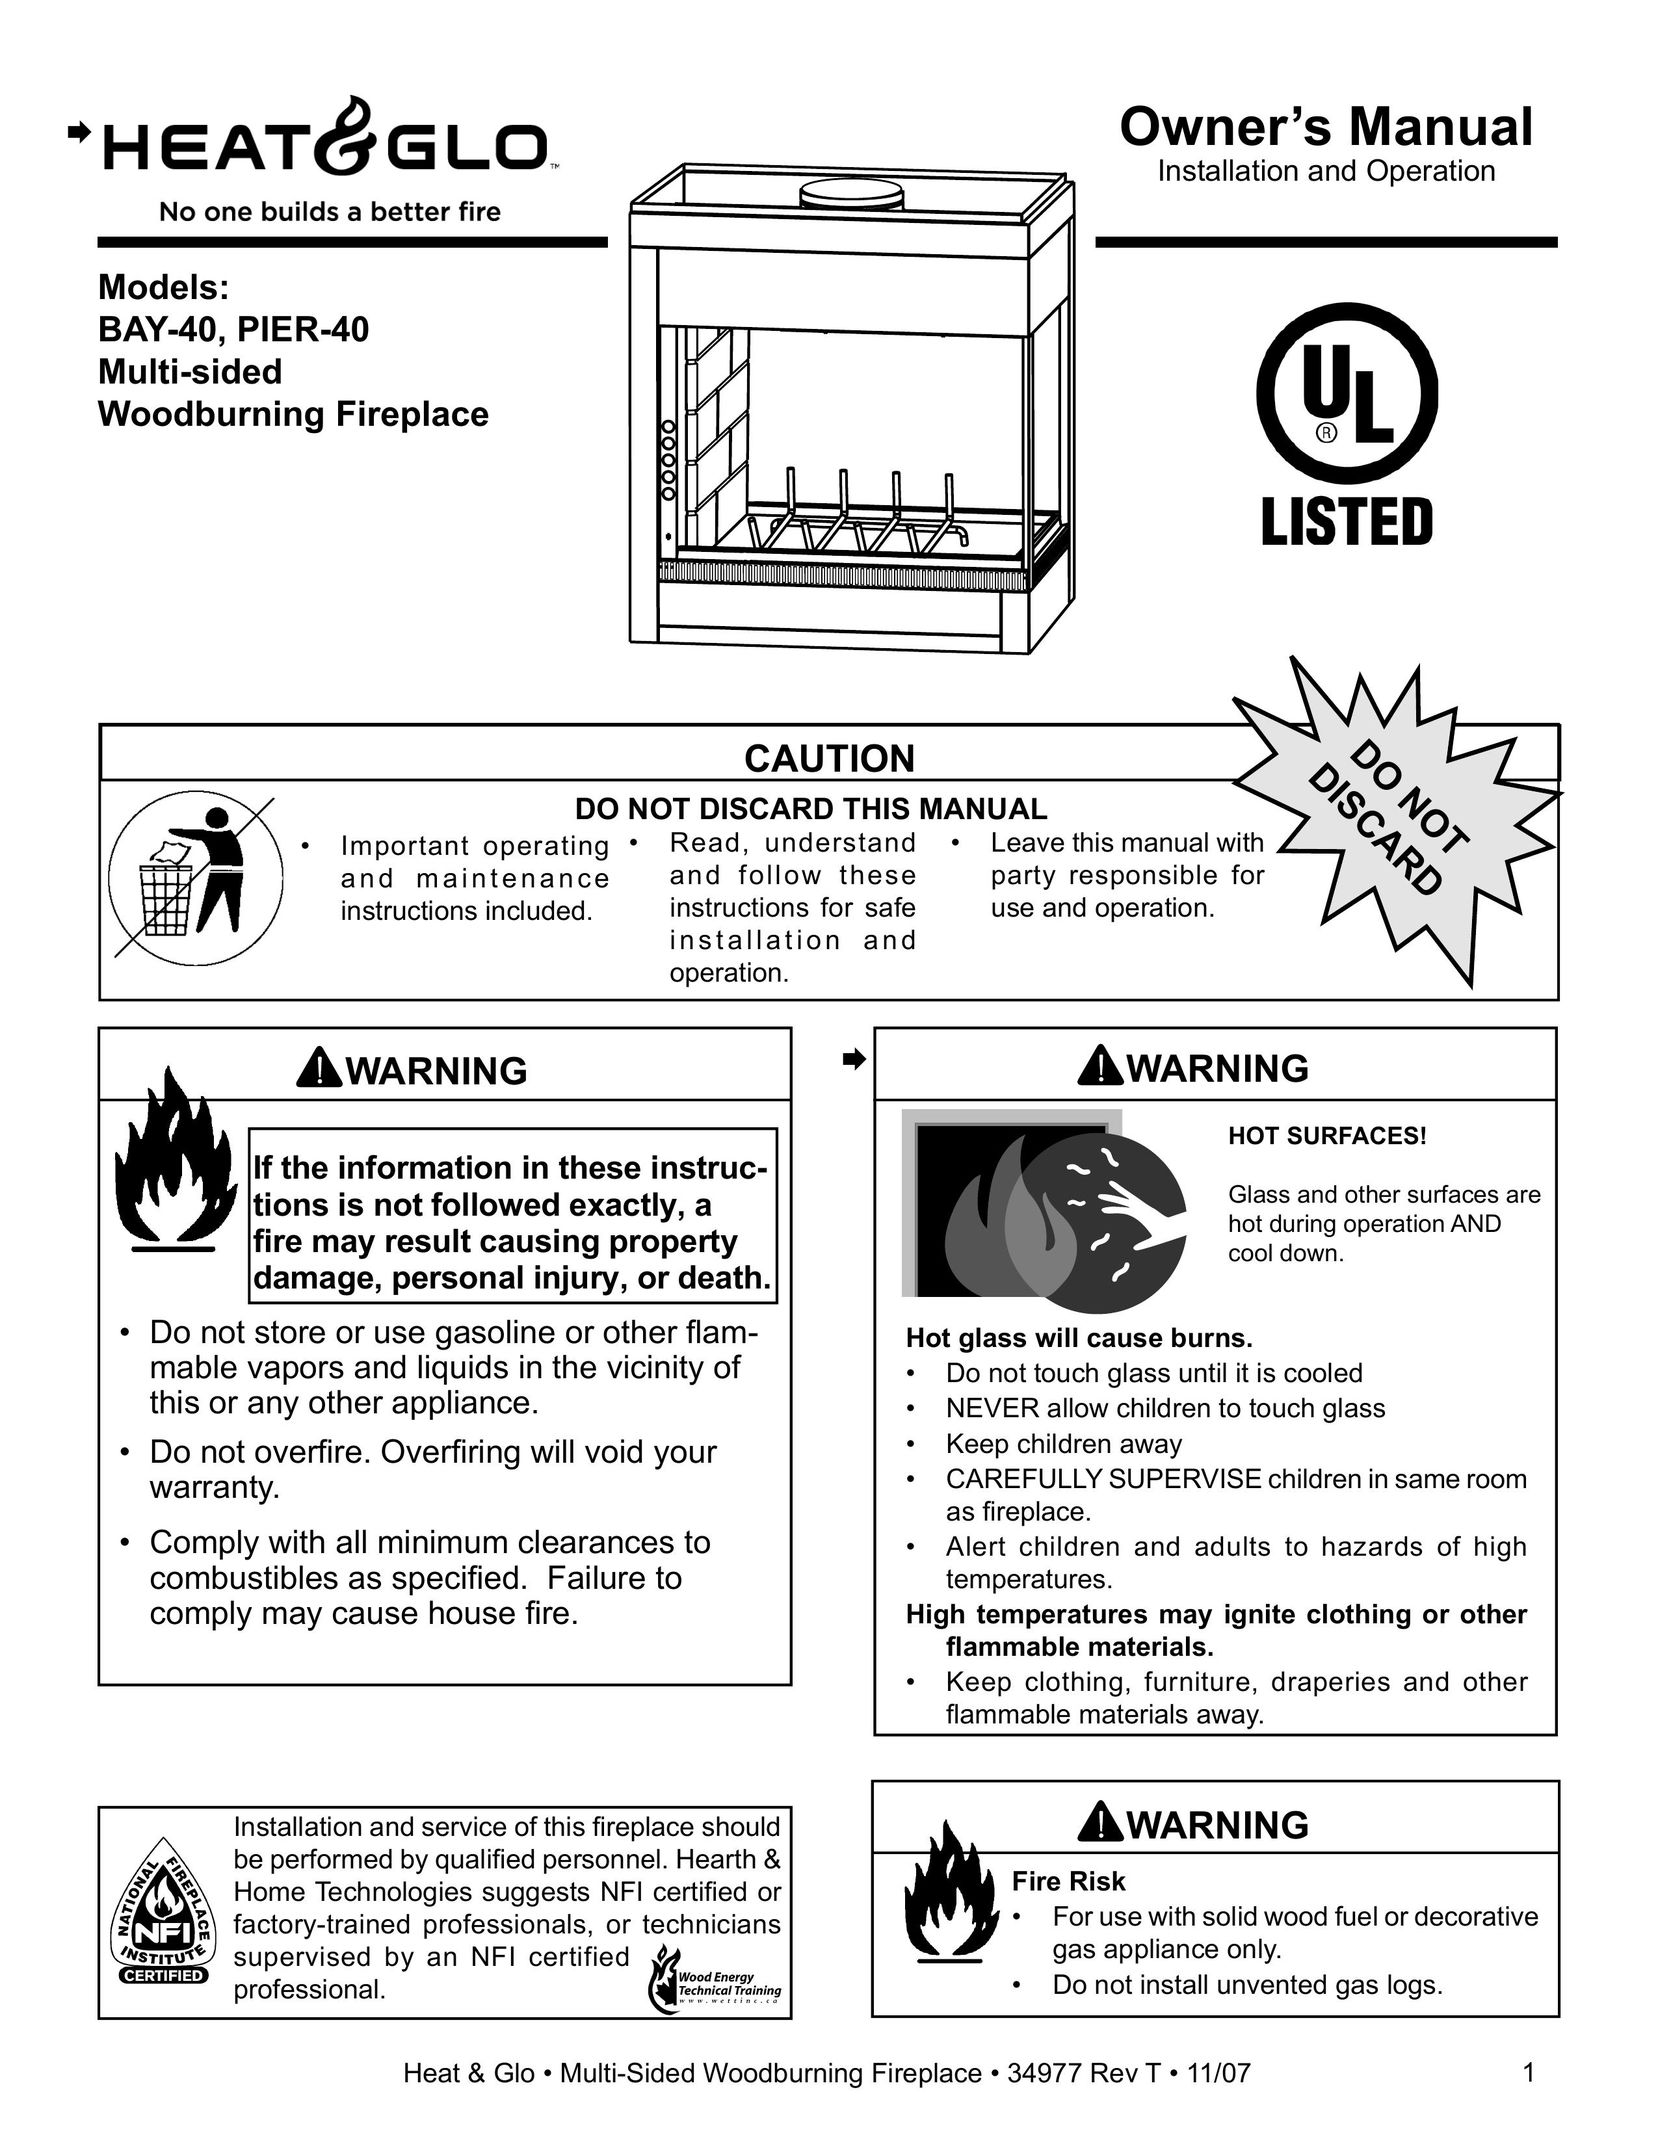 Heat & Glo LifeStyle BAY-40 Indoor Fireplace User Manual